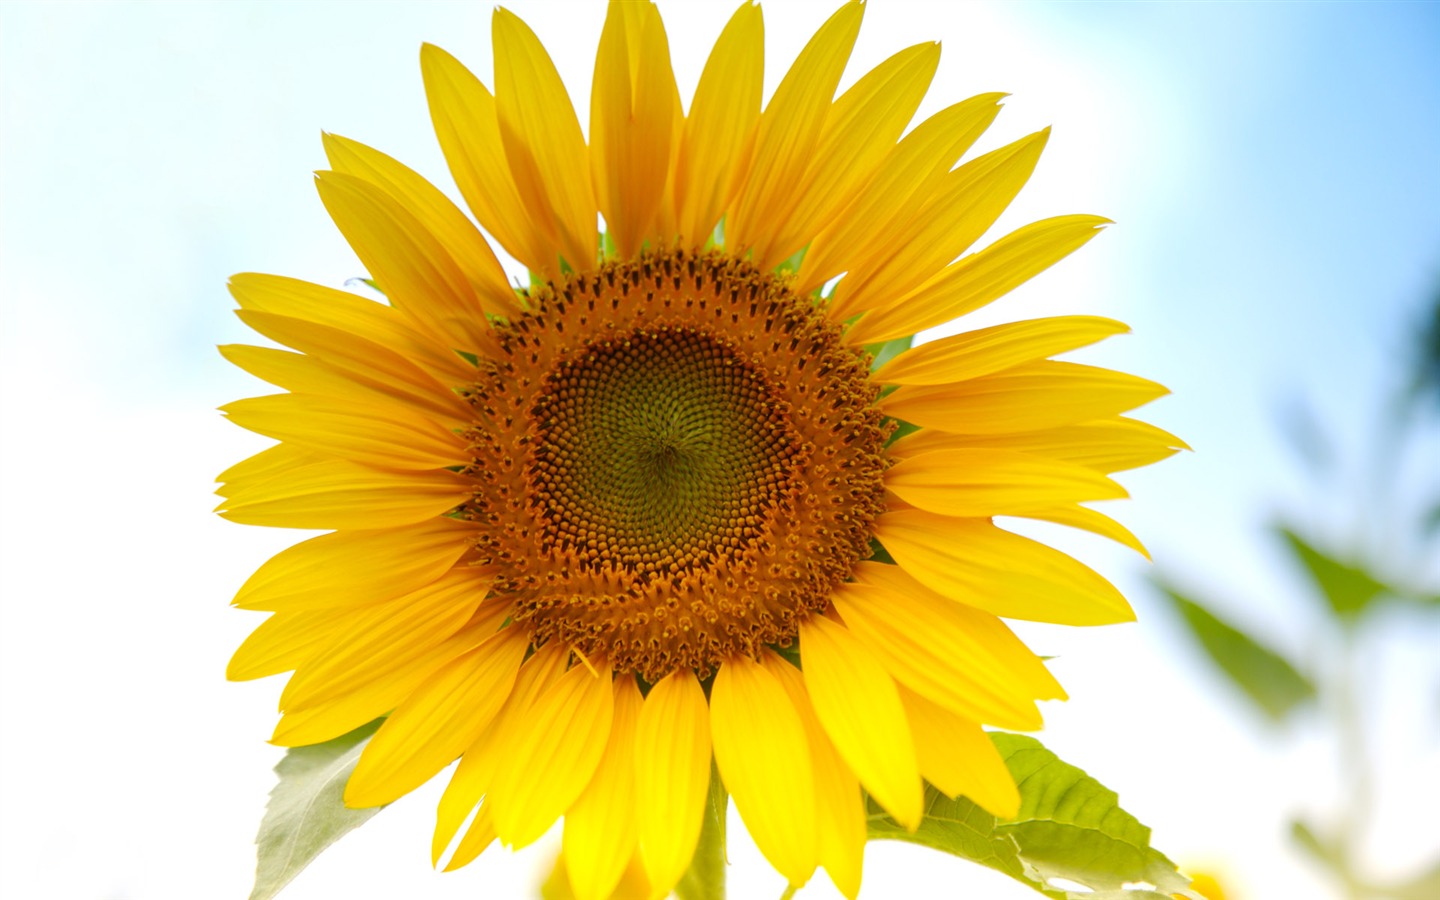 Sunny sunflower photo HD Wallpapers #5 - 1440x900